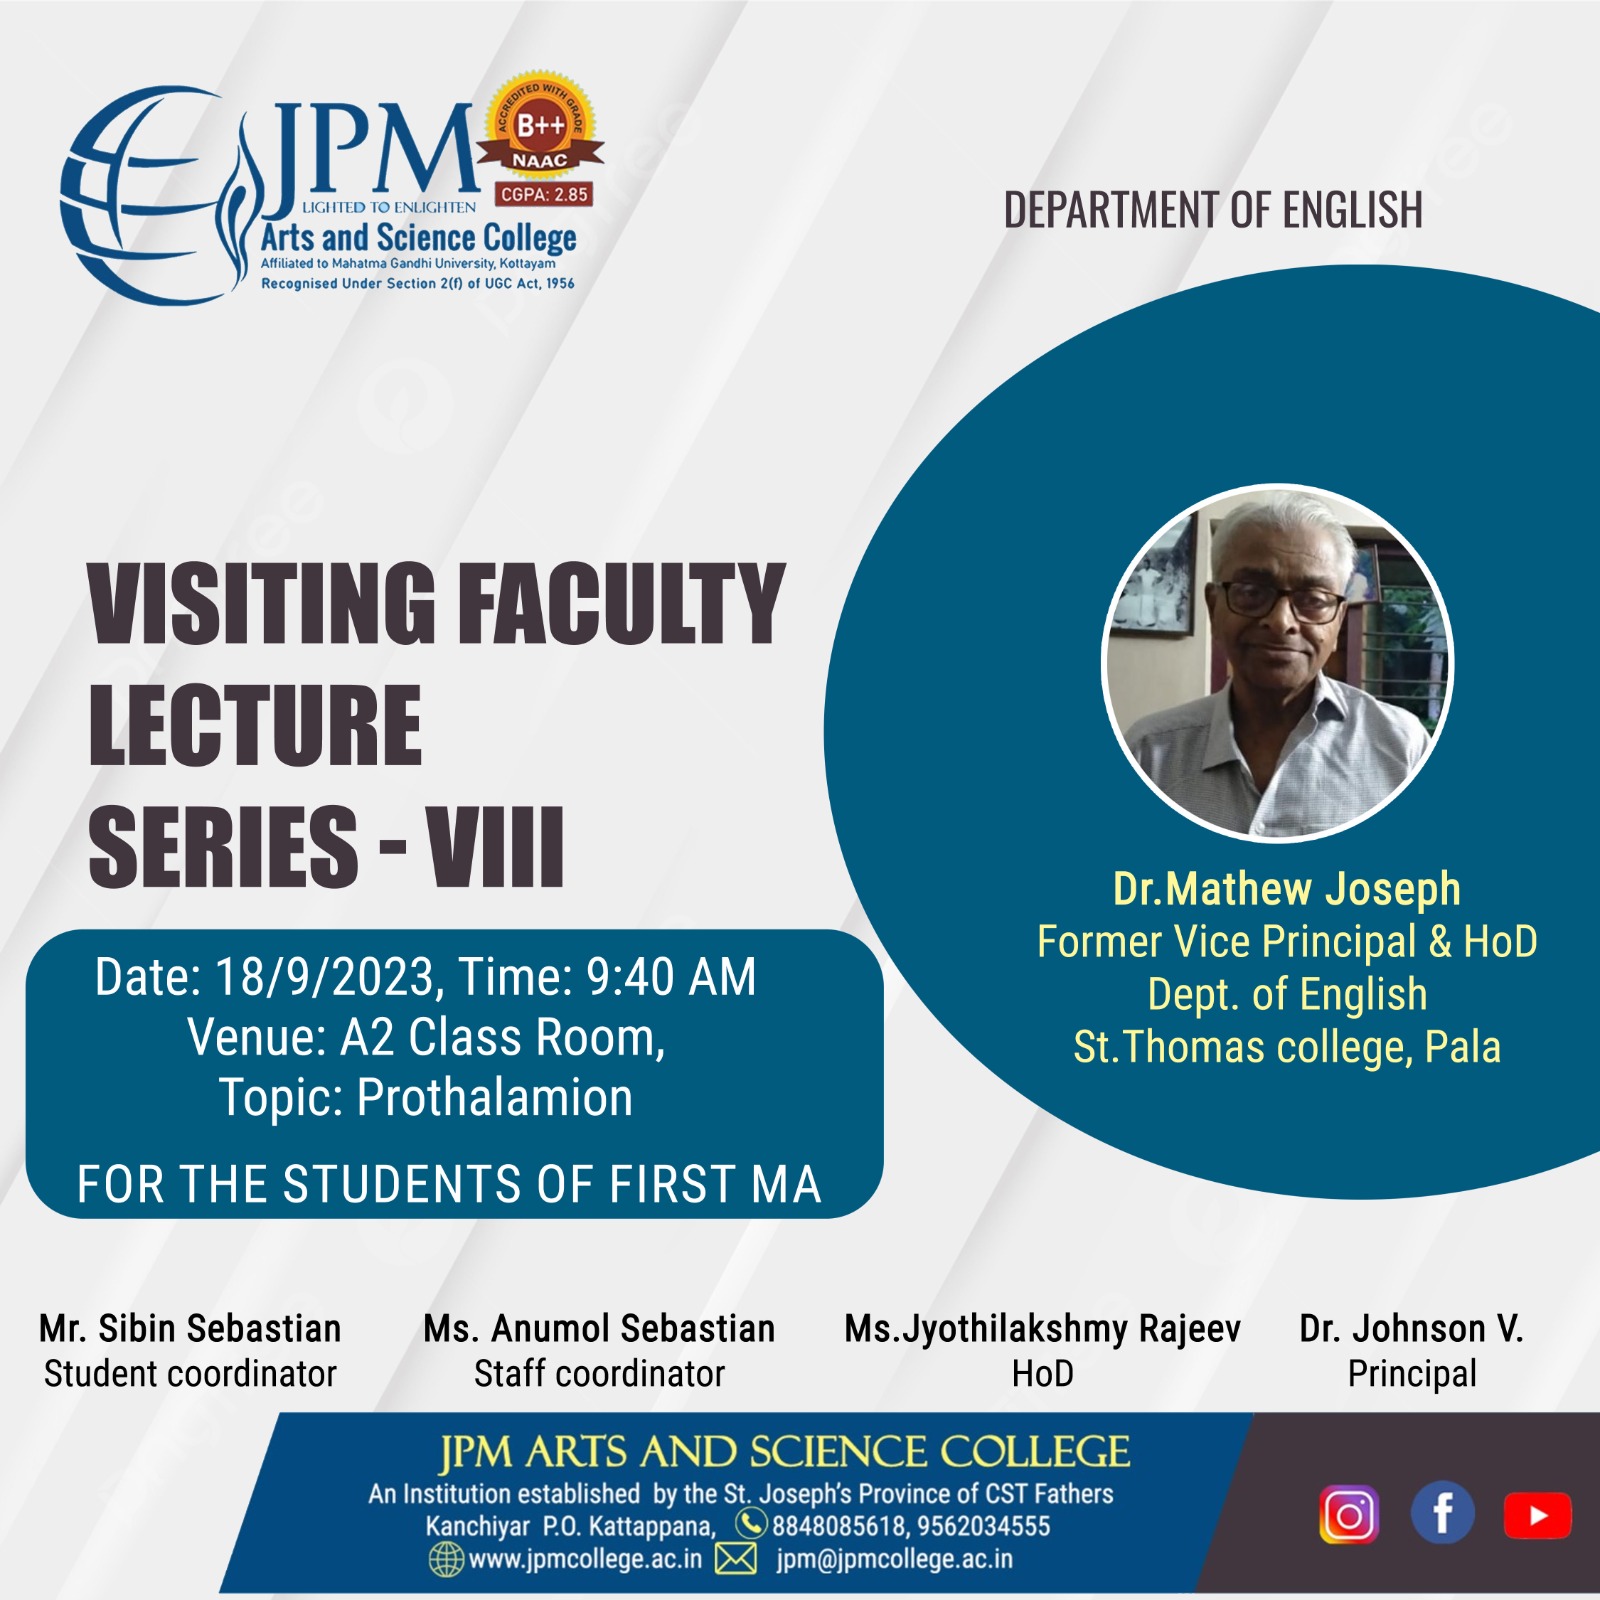 Visiting Faculty lecture series -VIII